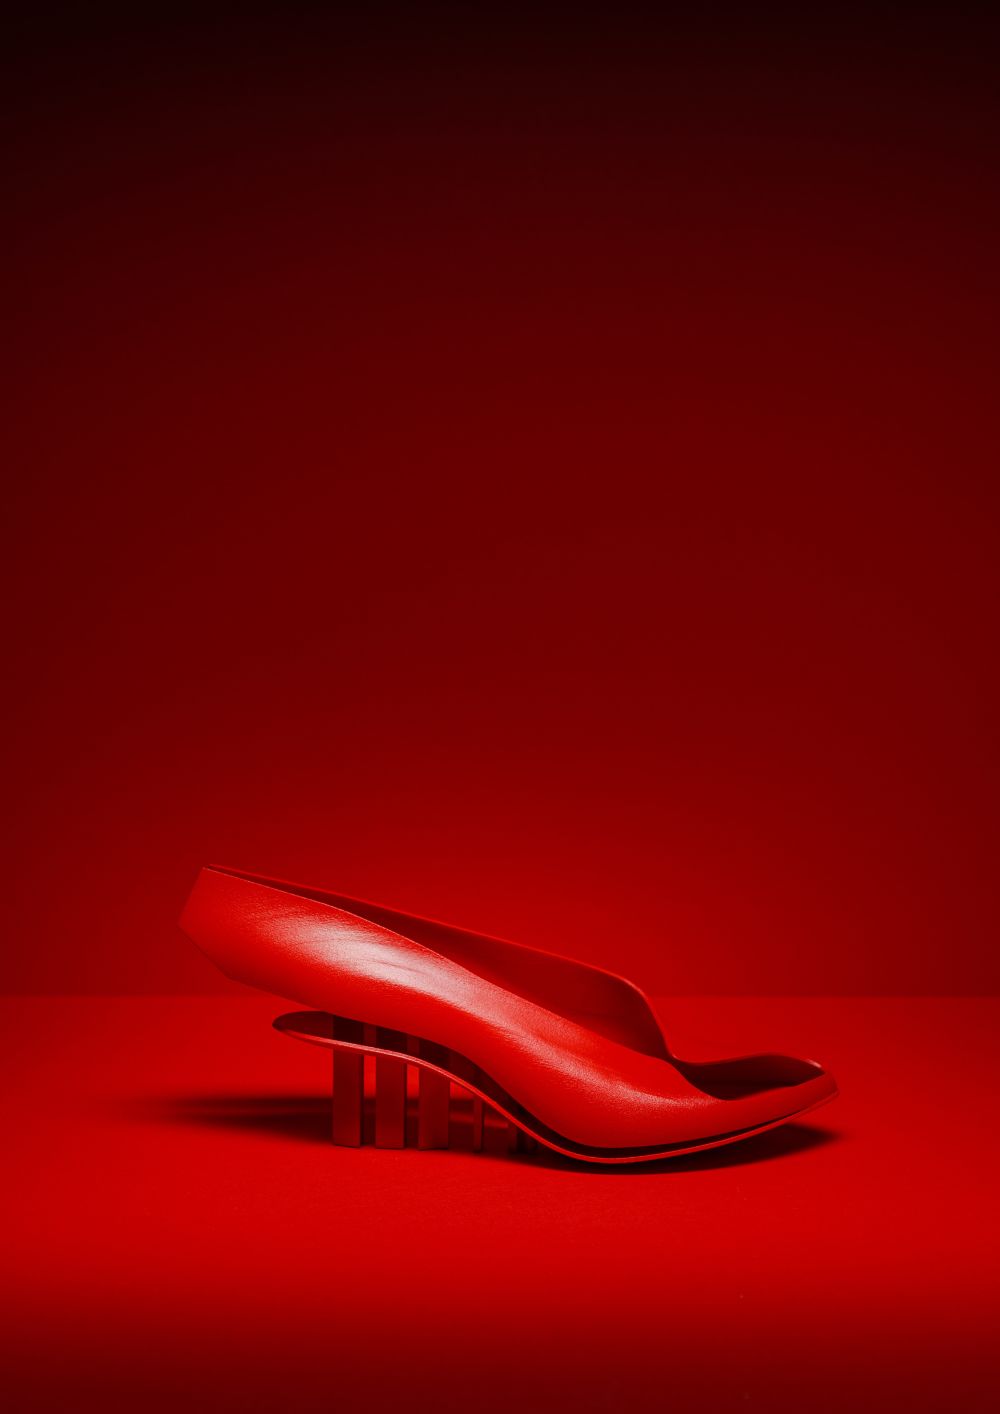 Red shoe against a red background